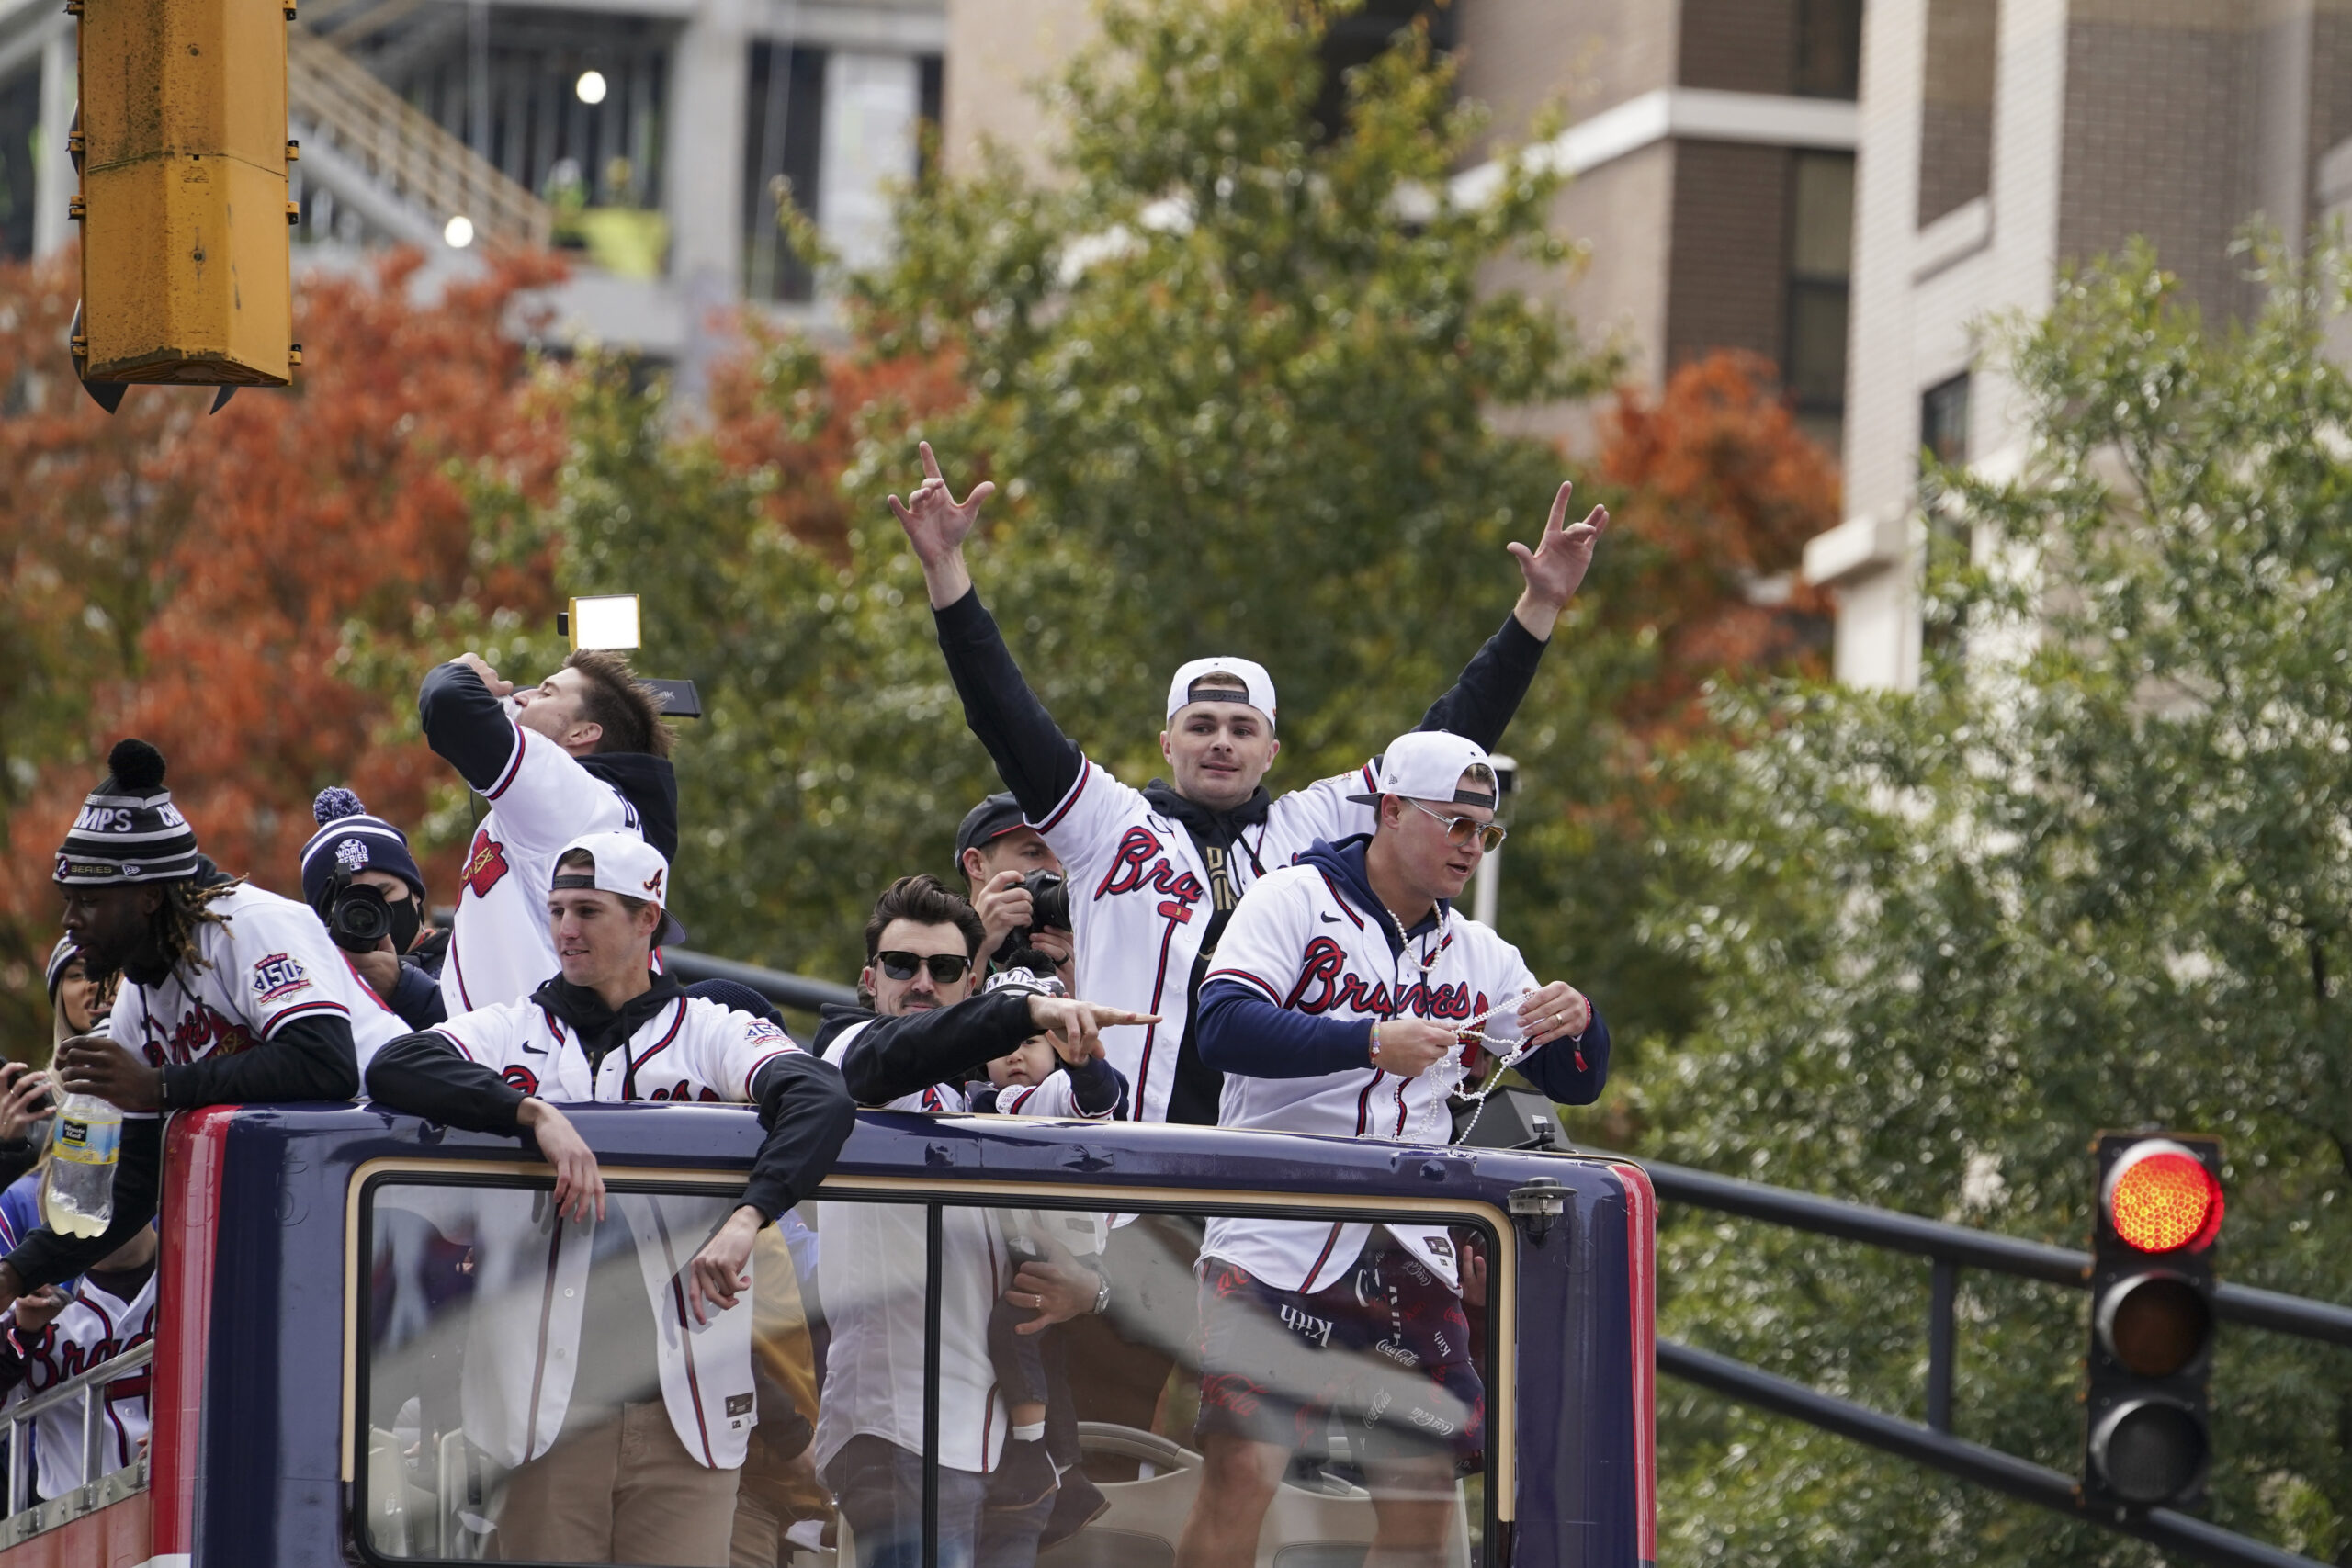 Braves to host World Series Championship parade and celebration